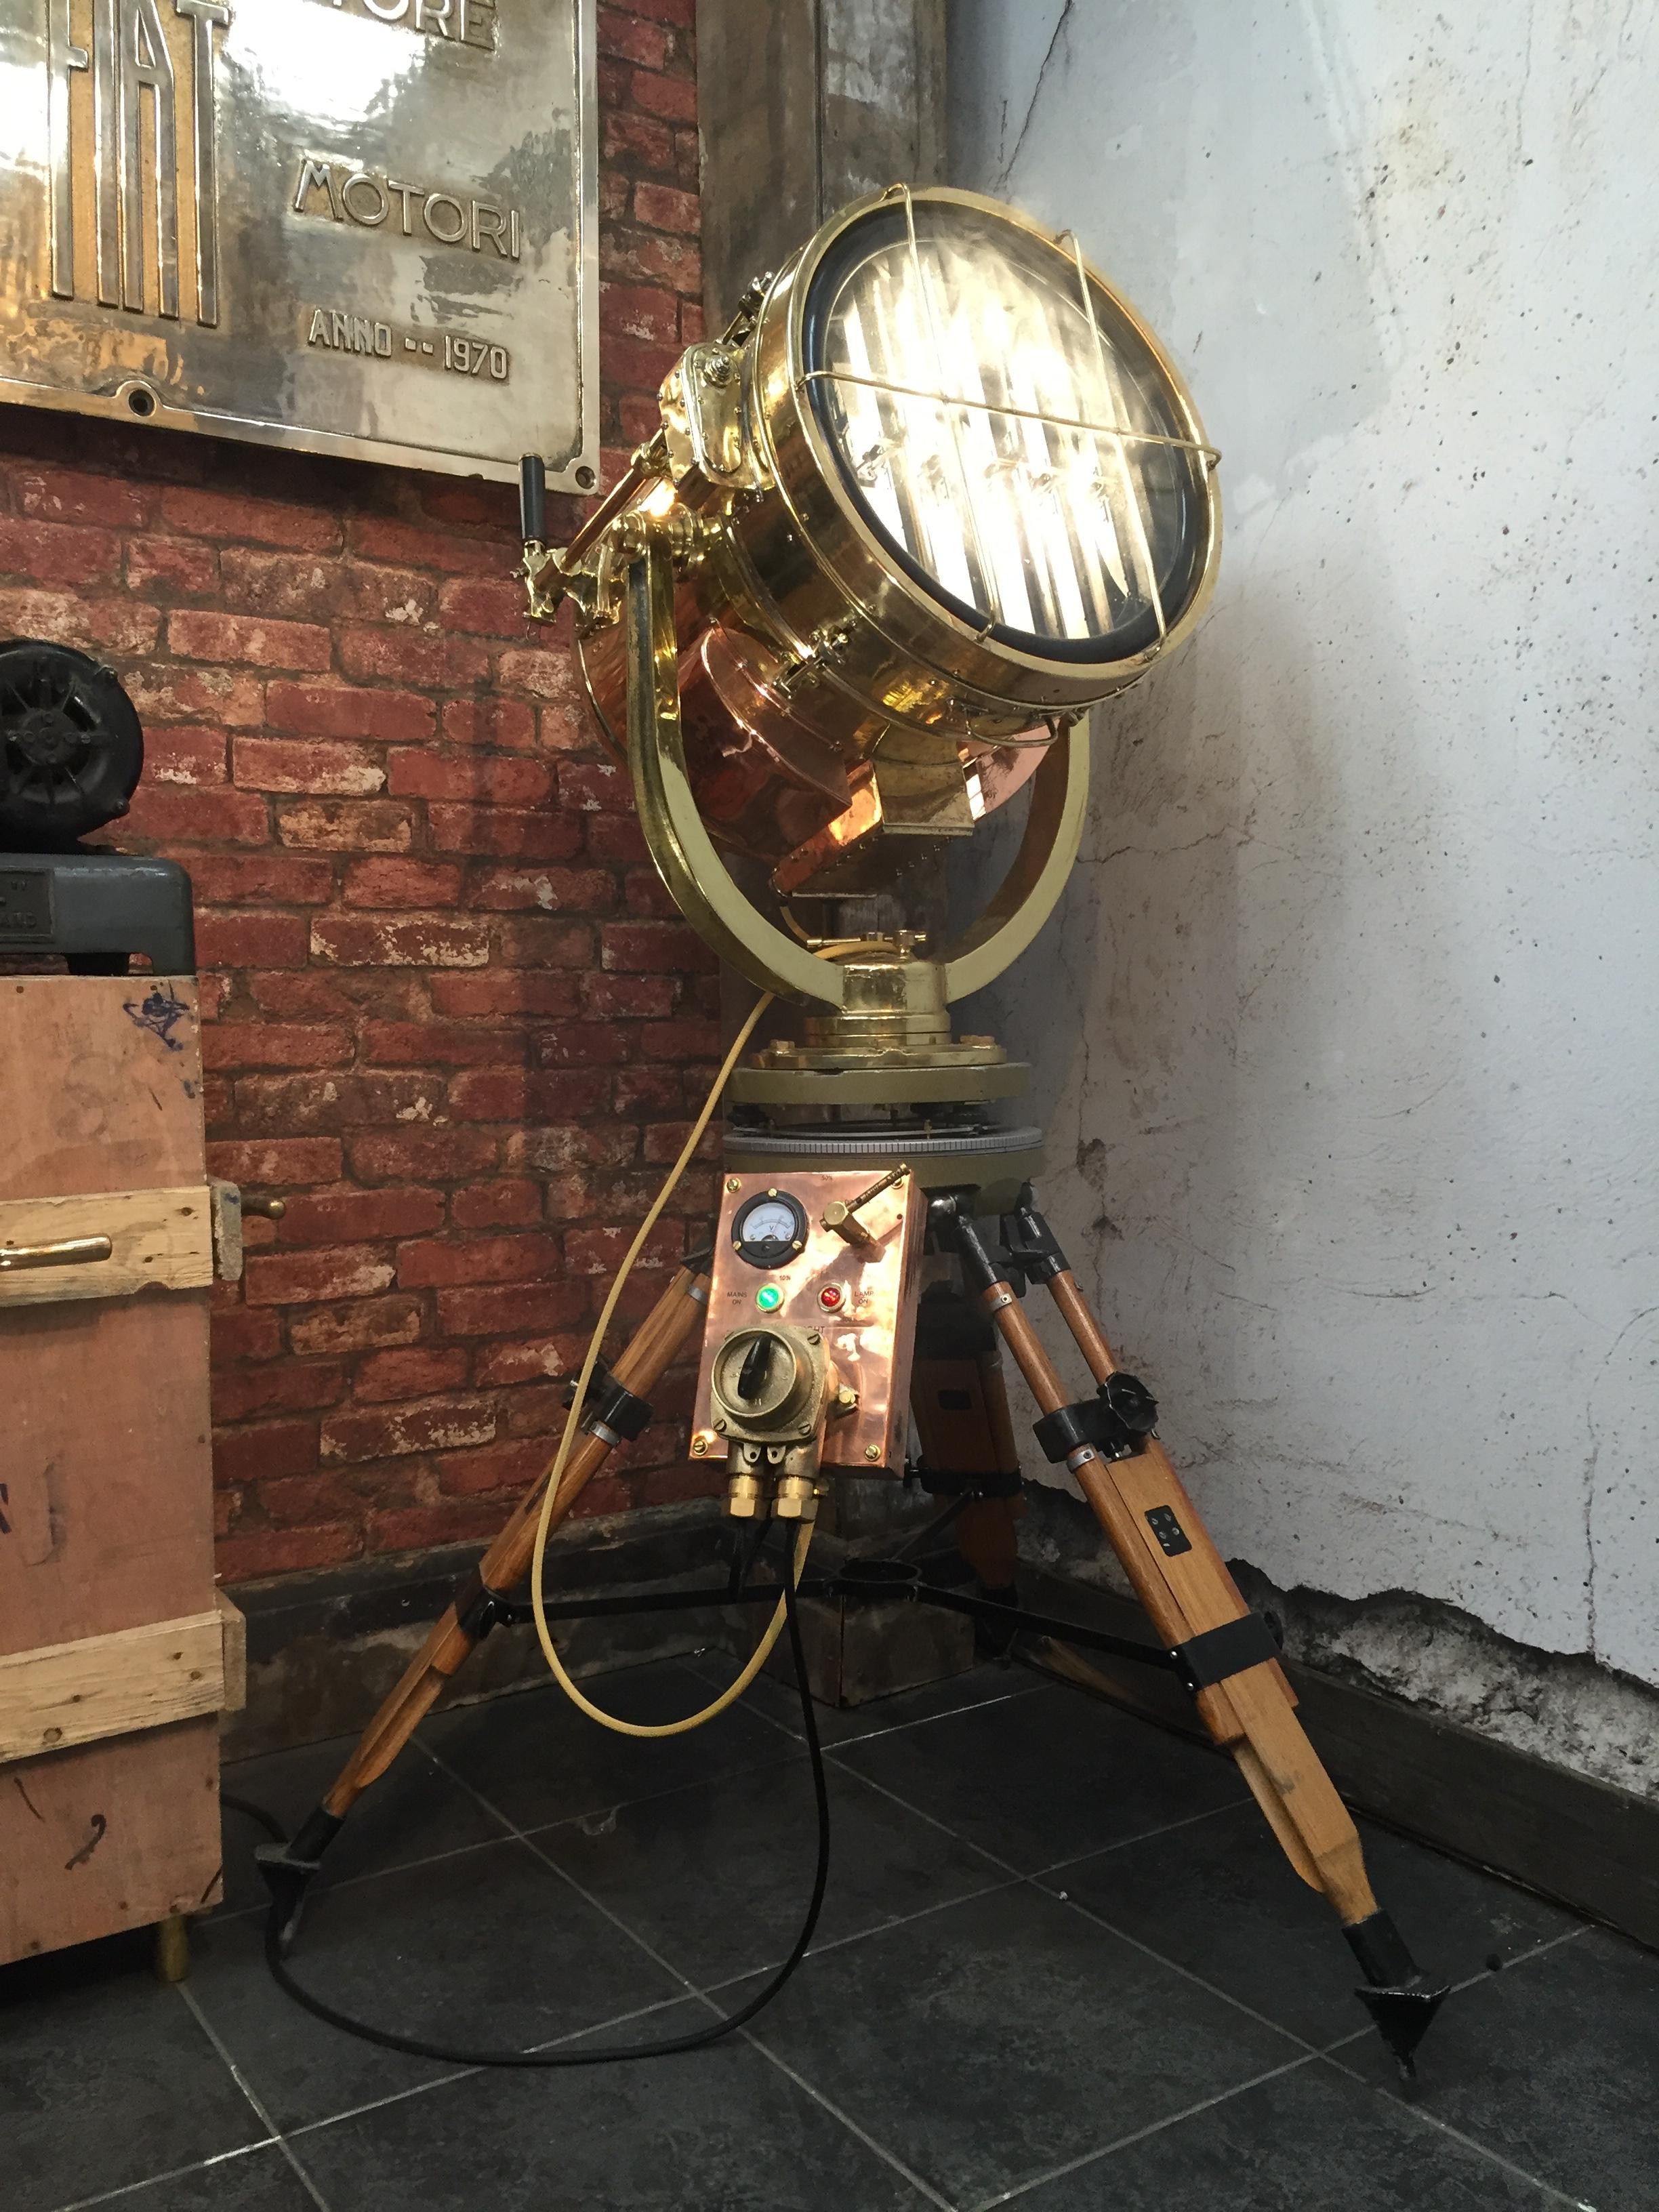 This is a Shonan Kosakusho daylight signalling lamp made in 1981, married with a Russian military gyroscope tripod. 

Reclaimed from Mid-Century war ships, Shonan did manufacture these during World War 2 until the firestorm on Japan ceased